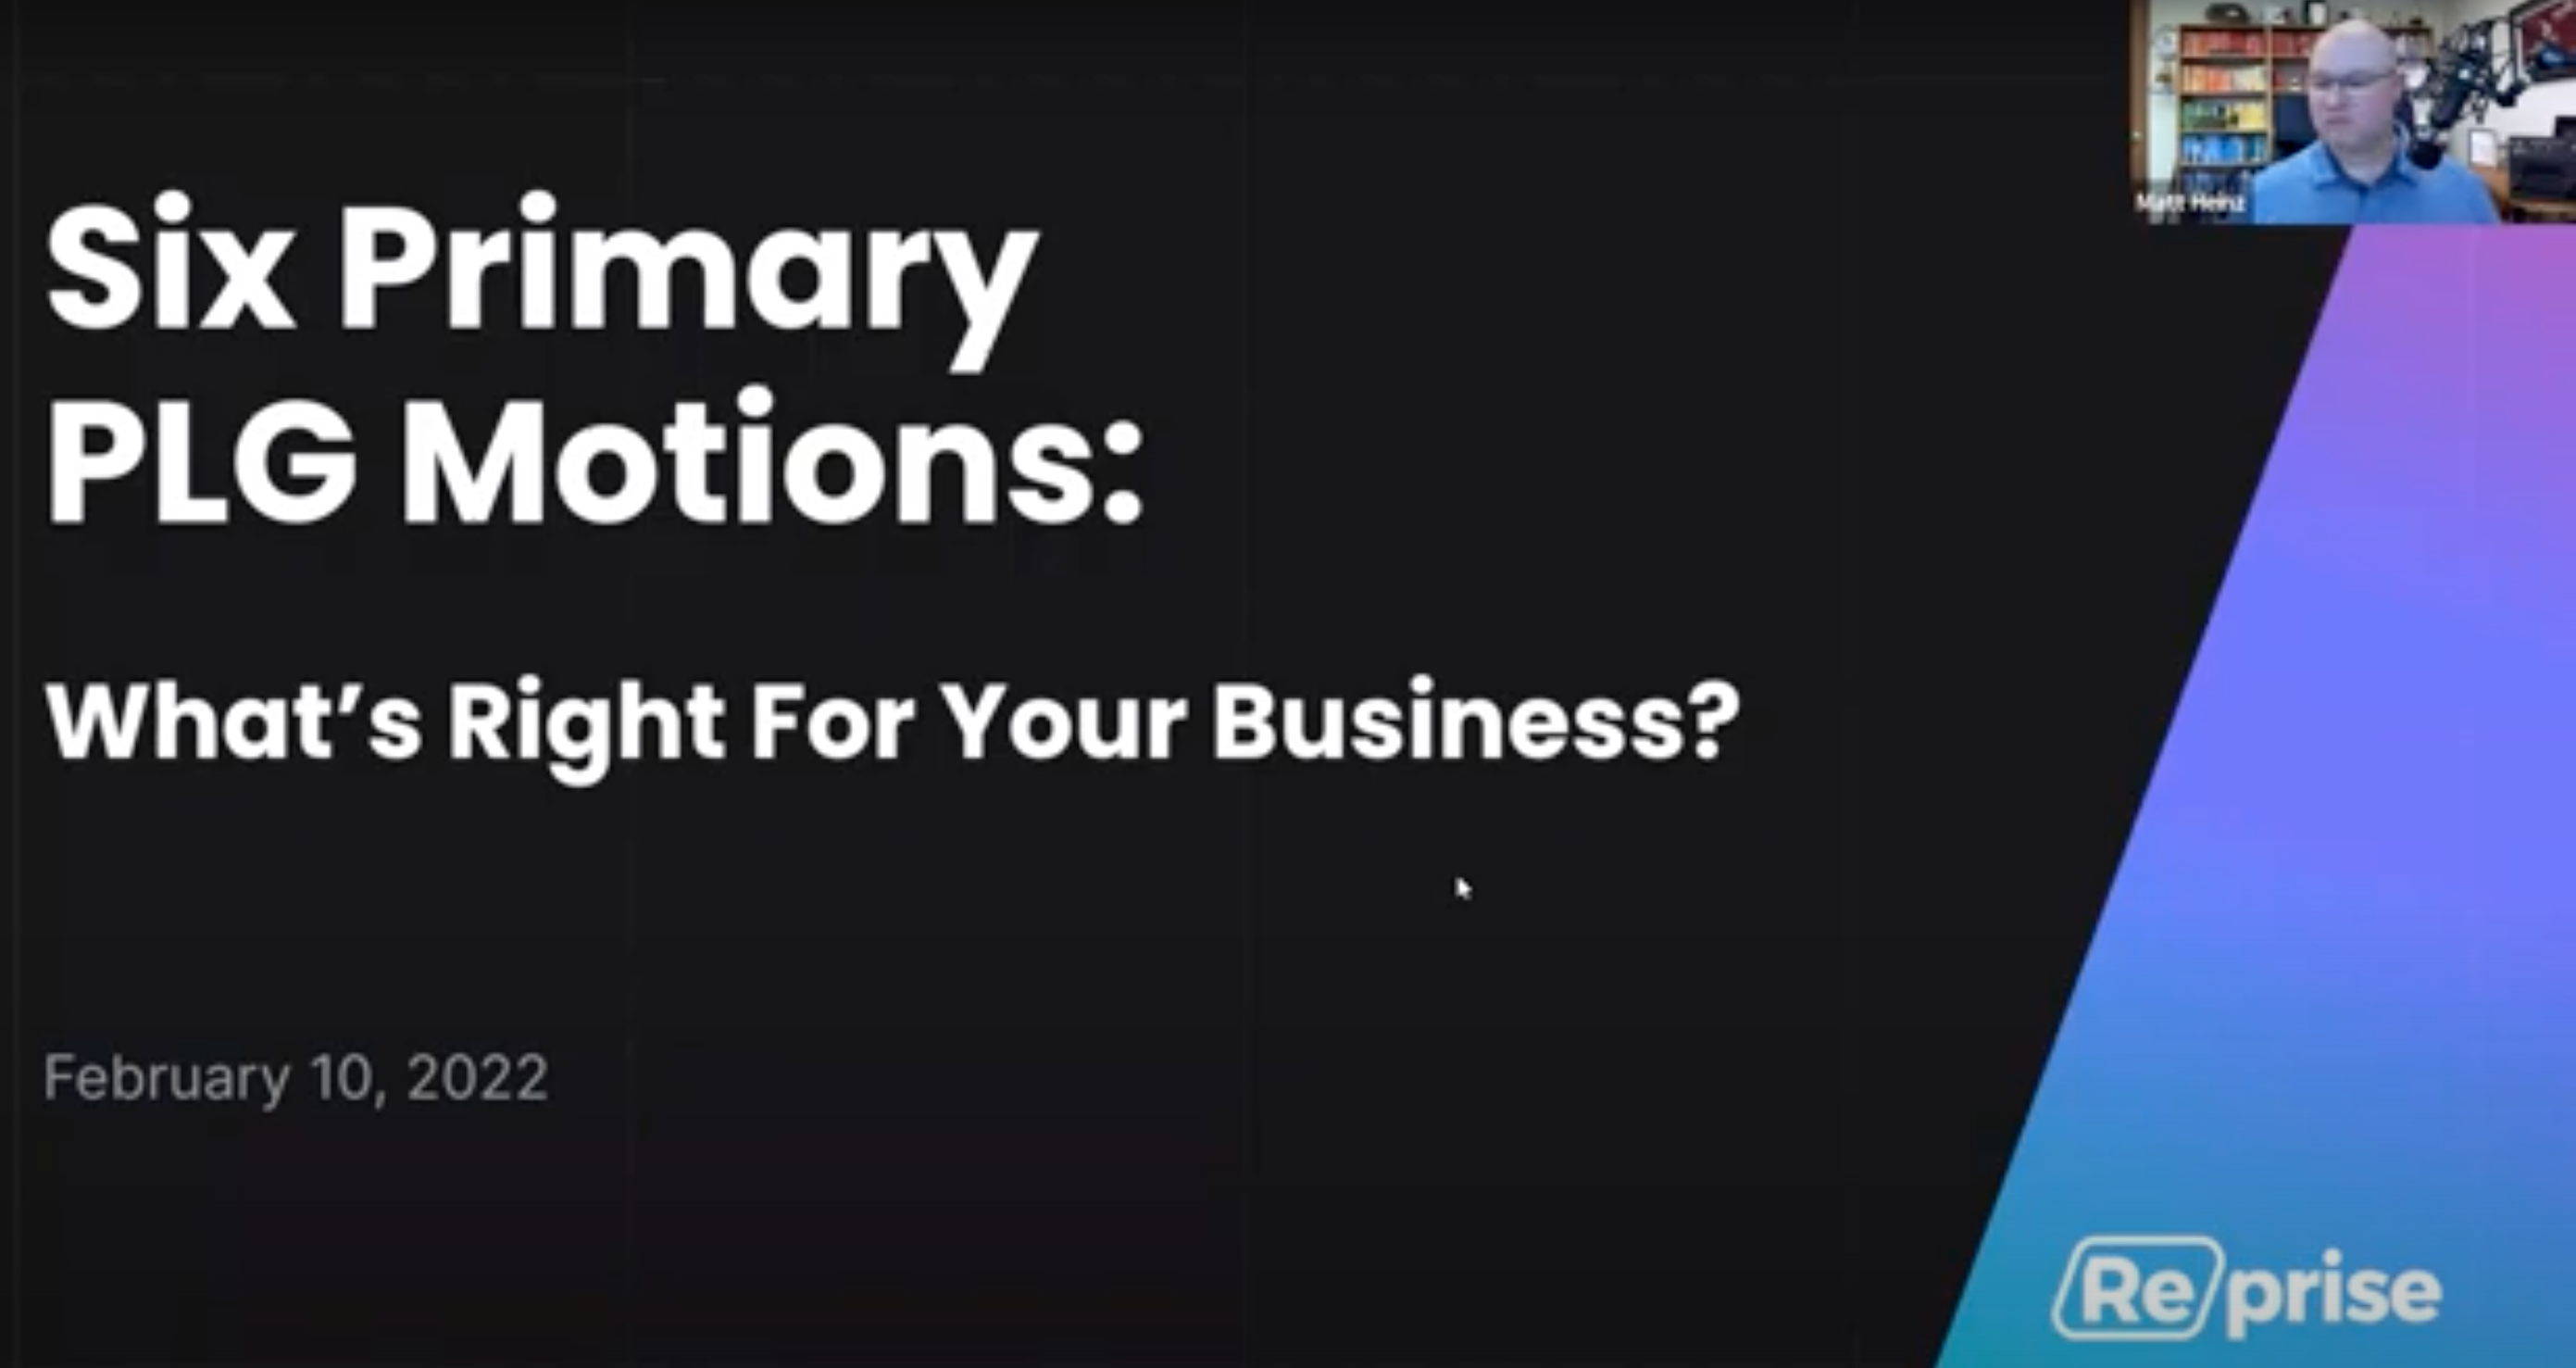 Six Primary PLG Motions: What’s Right For Your Business?